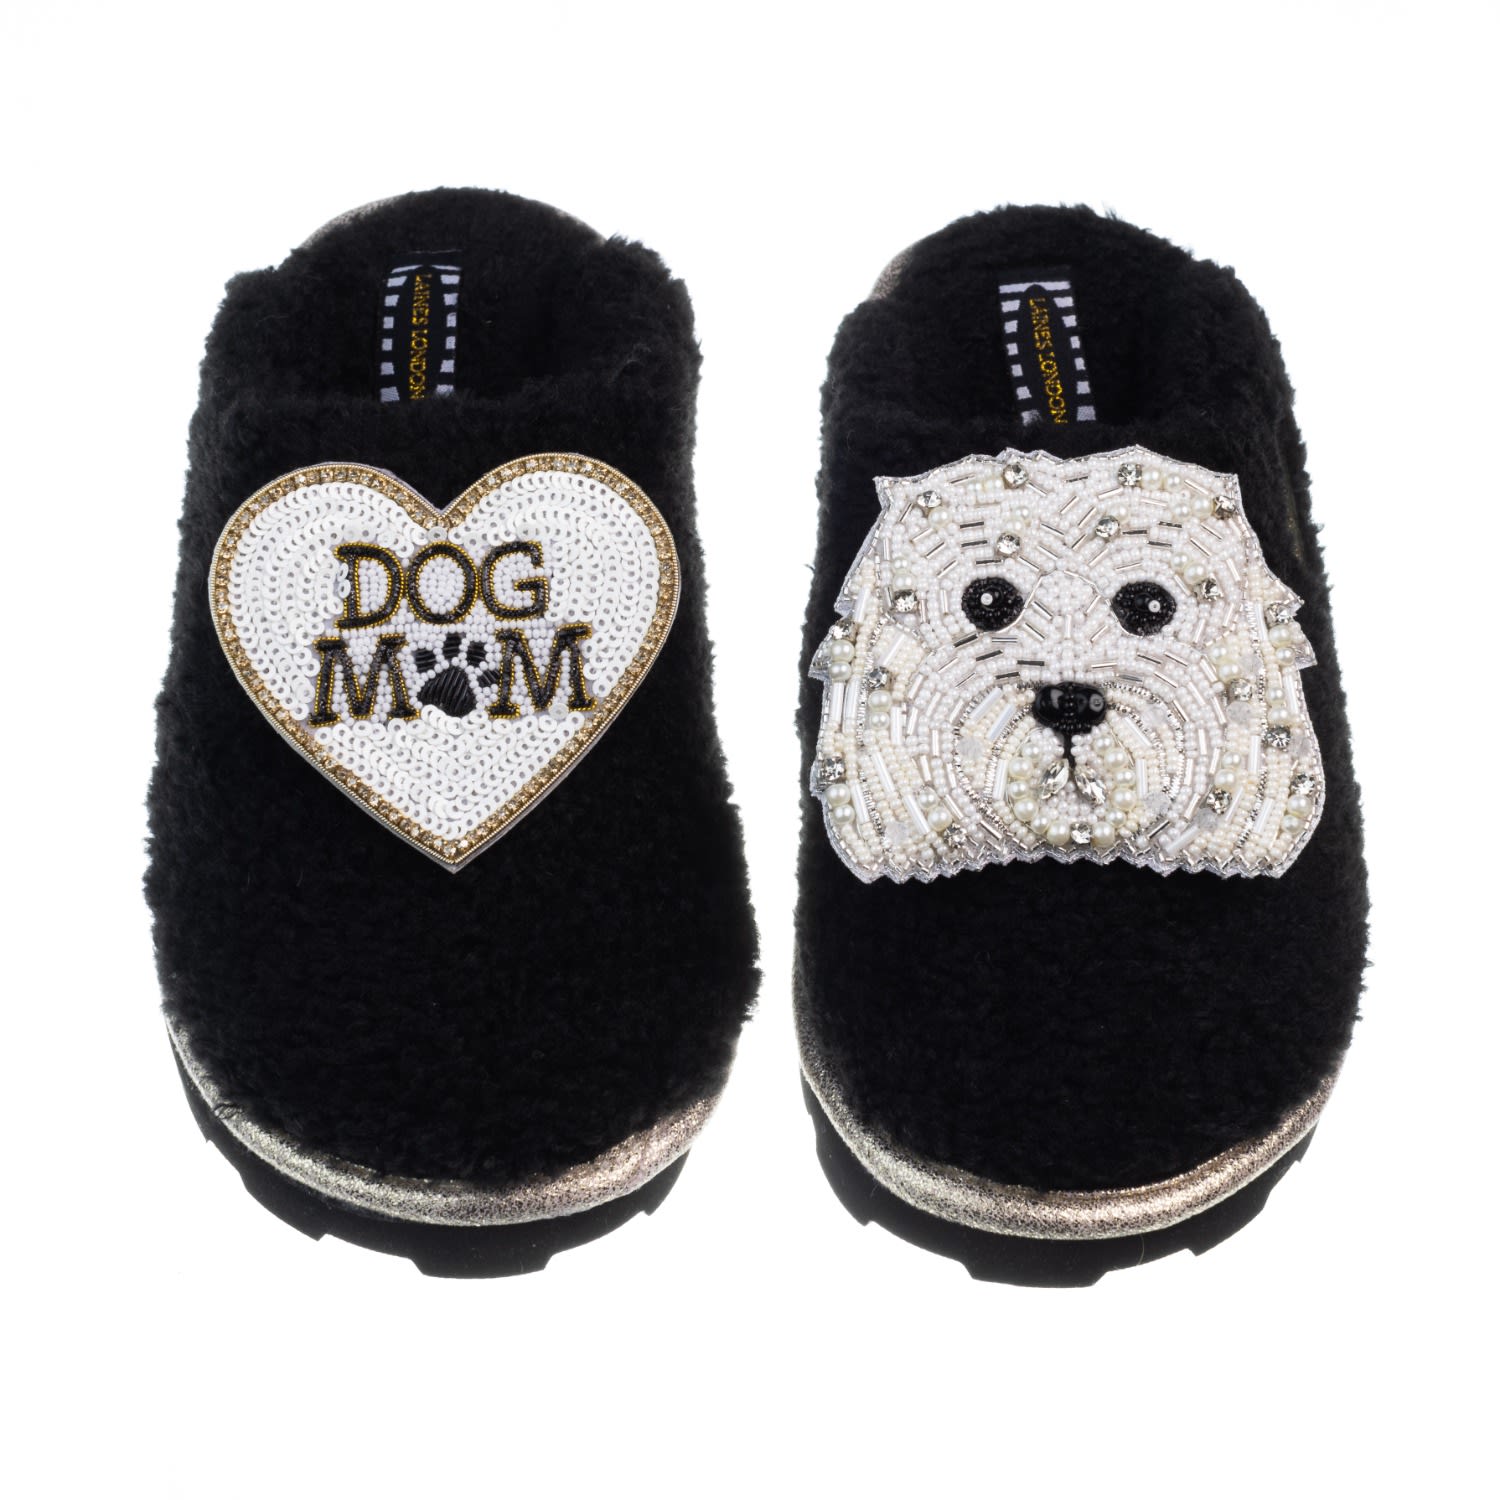 Laines London Women's Teddy Closed Toe Slippers With Queenie & Dog Mum / Mom Brooches - Black